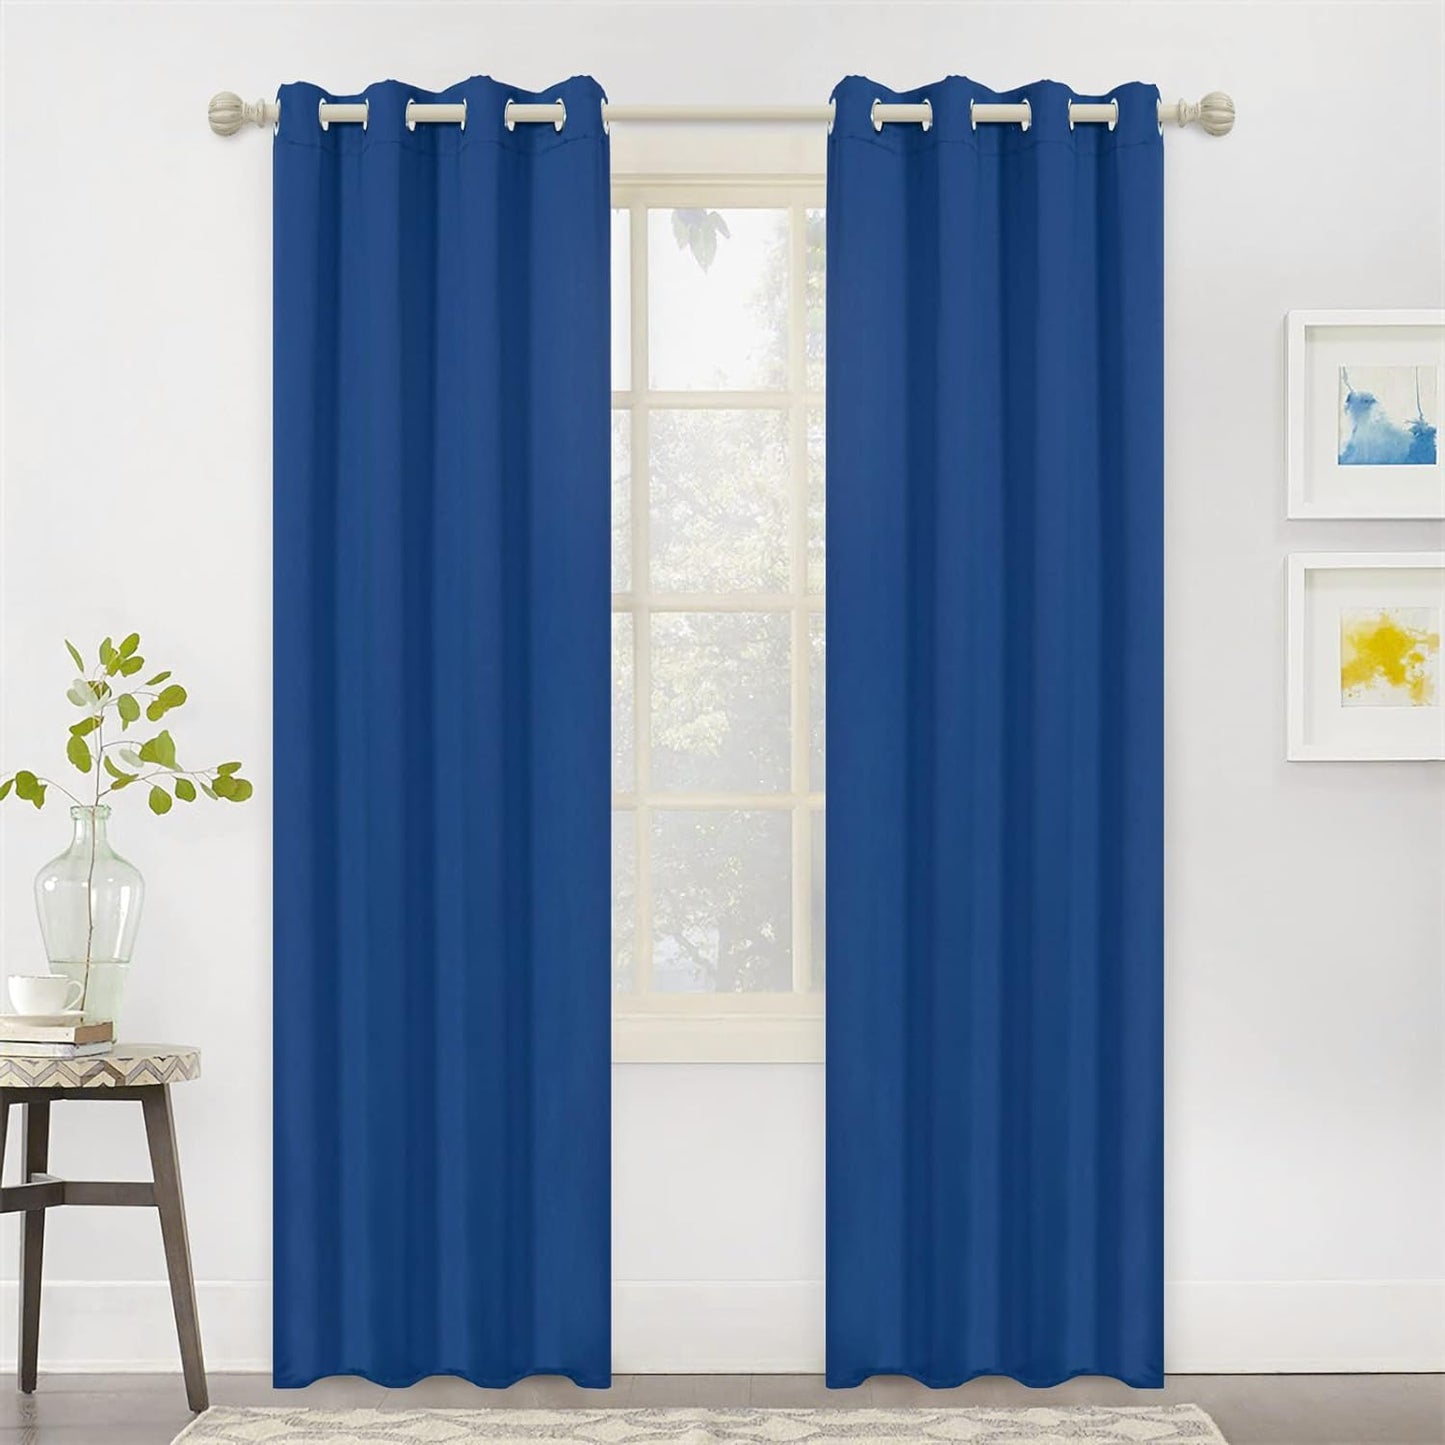 MYSKY HOME Black Curtains for Bedroom 90 Inch Long Blackout Curtains for Living Room 2 Panels Thermal Insulated Grommet Room Darkening Curtains Privacy Protect Window Drapes, 52 X 90 Inches, Black  MYSKY HOME Royal Blue 52W X 84L 